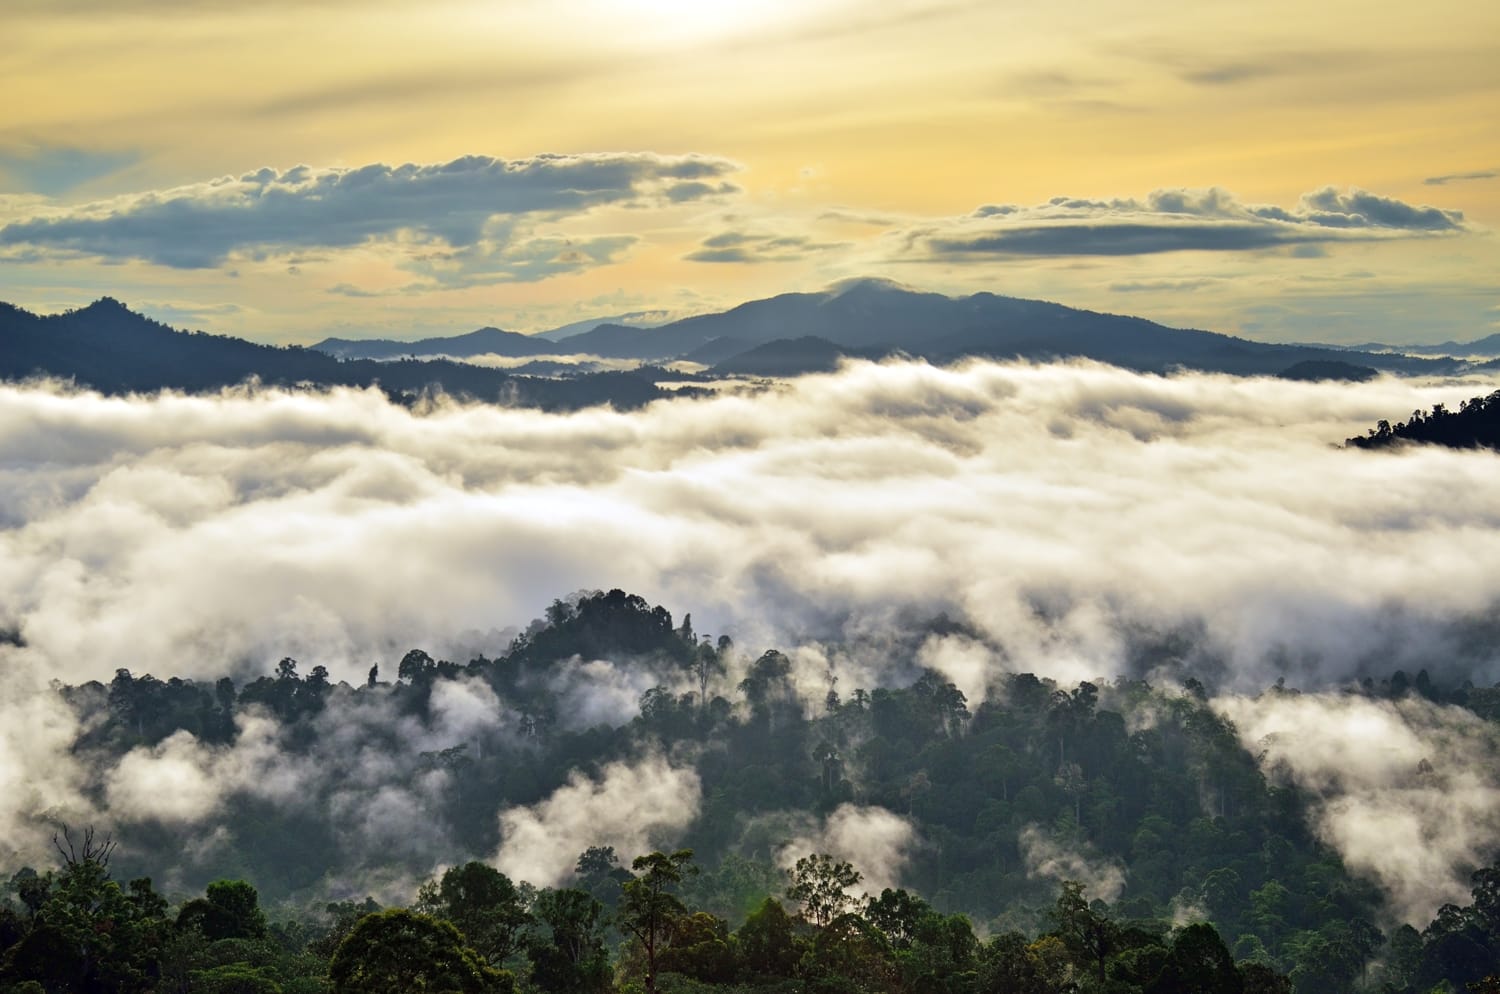 Sunrise with fogs and mist over rain forest in Danum Valley Conservation Area in Lahad Datu, Sabah Borneo, Malaysia.